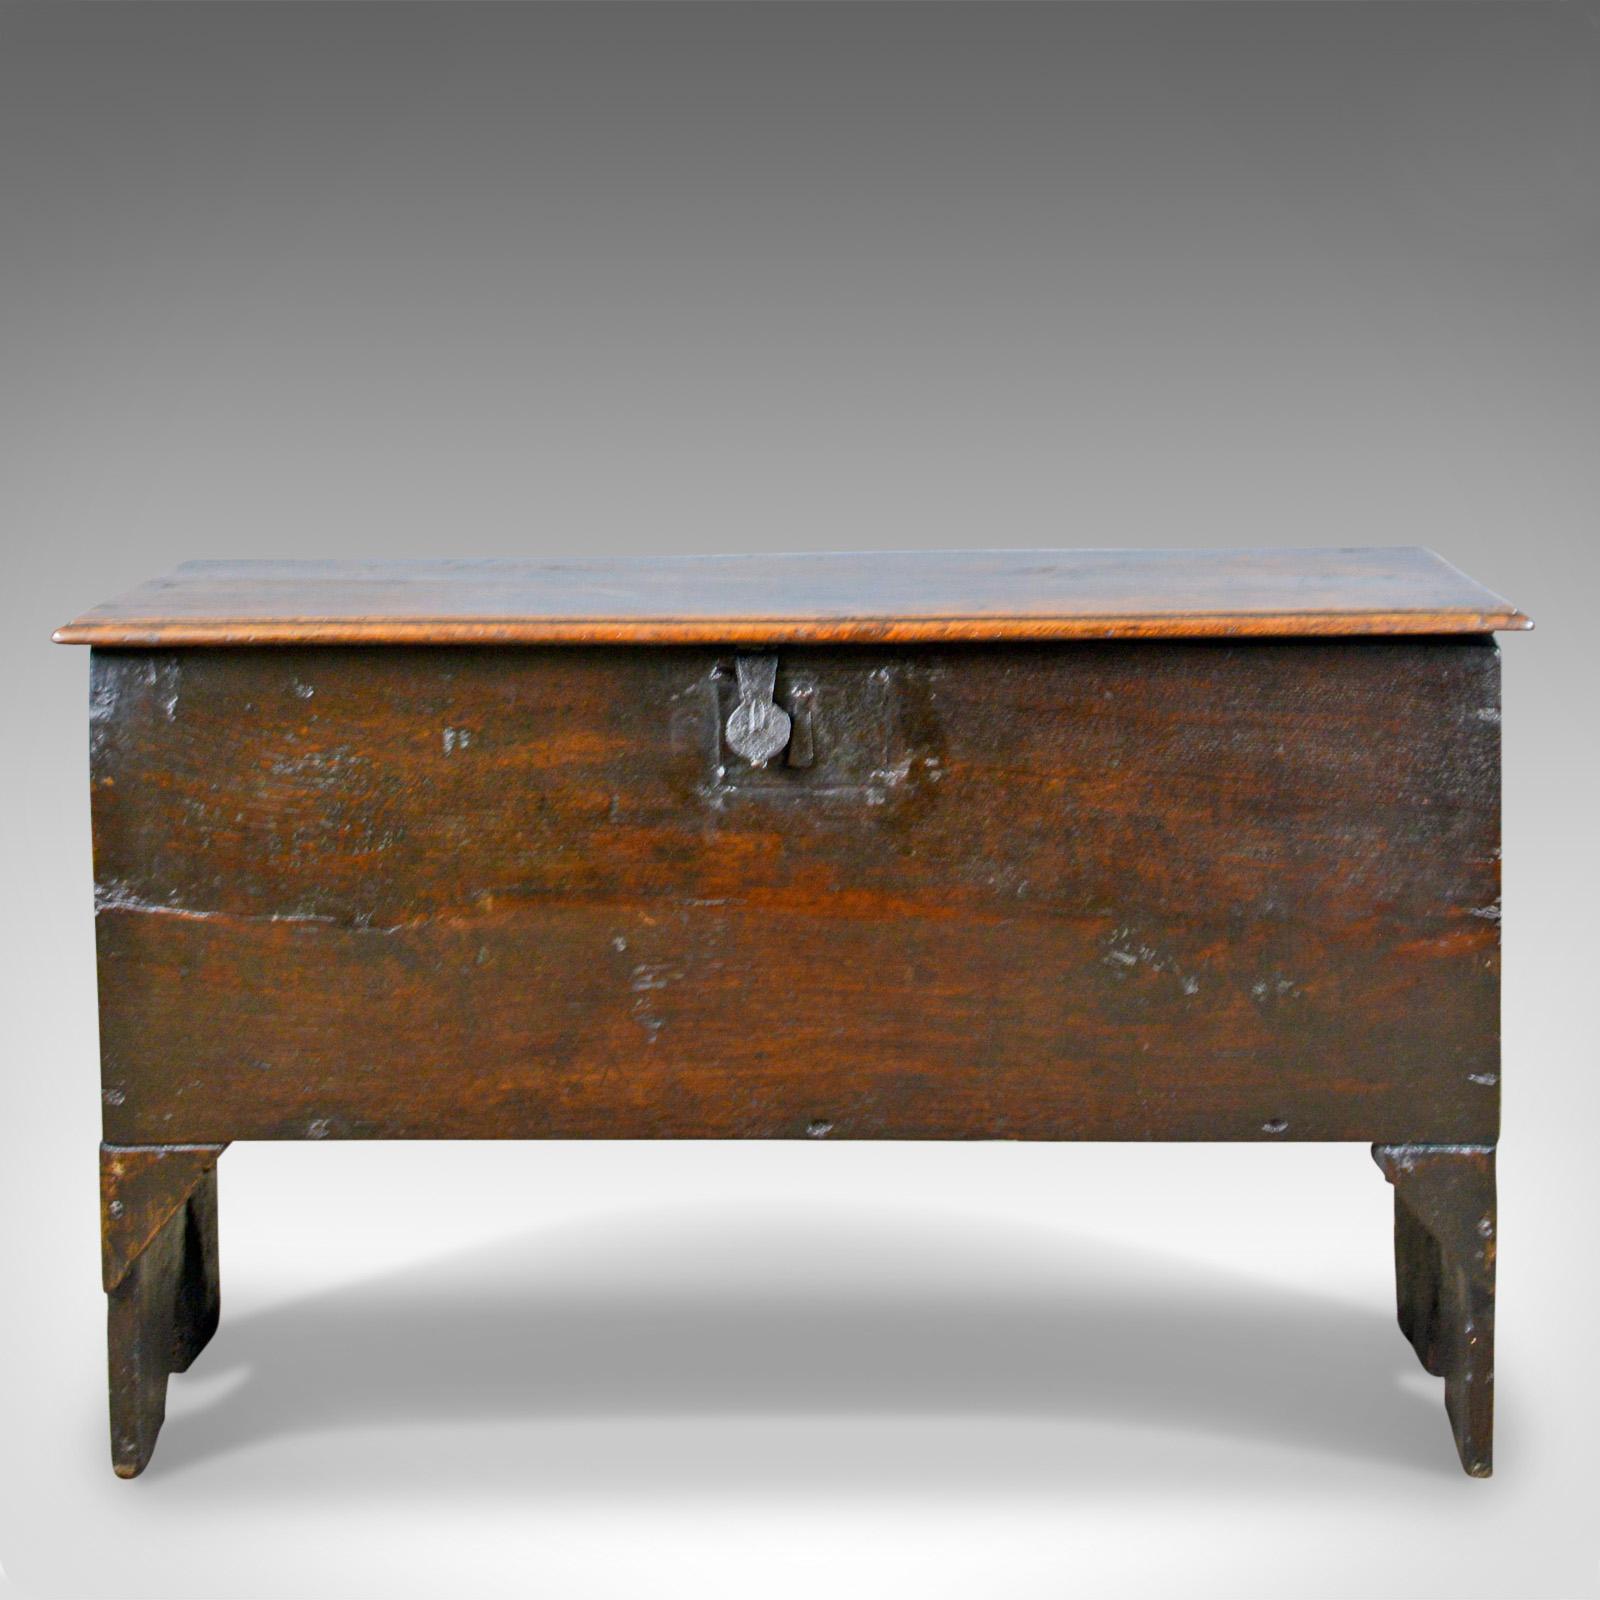 This is an antique coffer, a 6 plank sword chest in English oak dating to the 17th century c.1660

Classic six board construction
English oak with desirable aged patina
Raised on extended stiles to the ends

The top displays well with molded